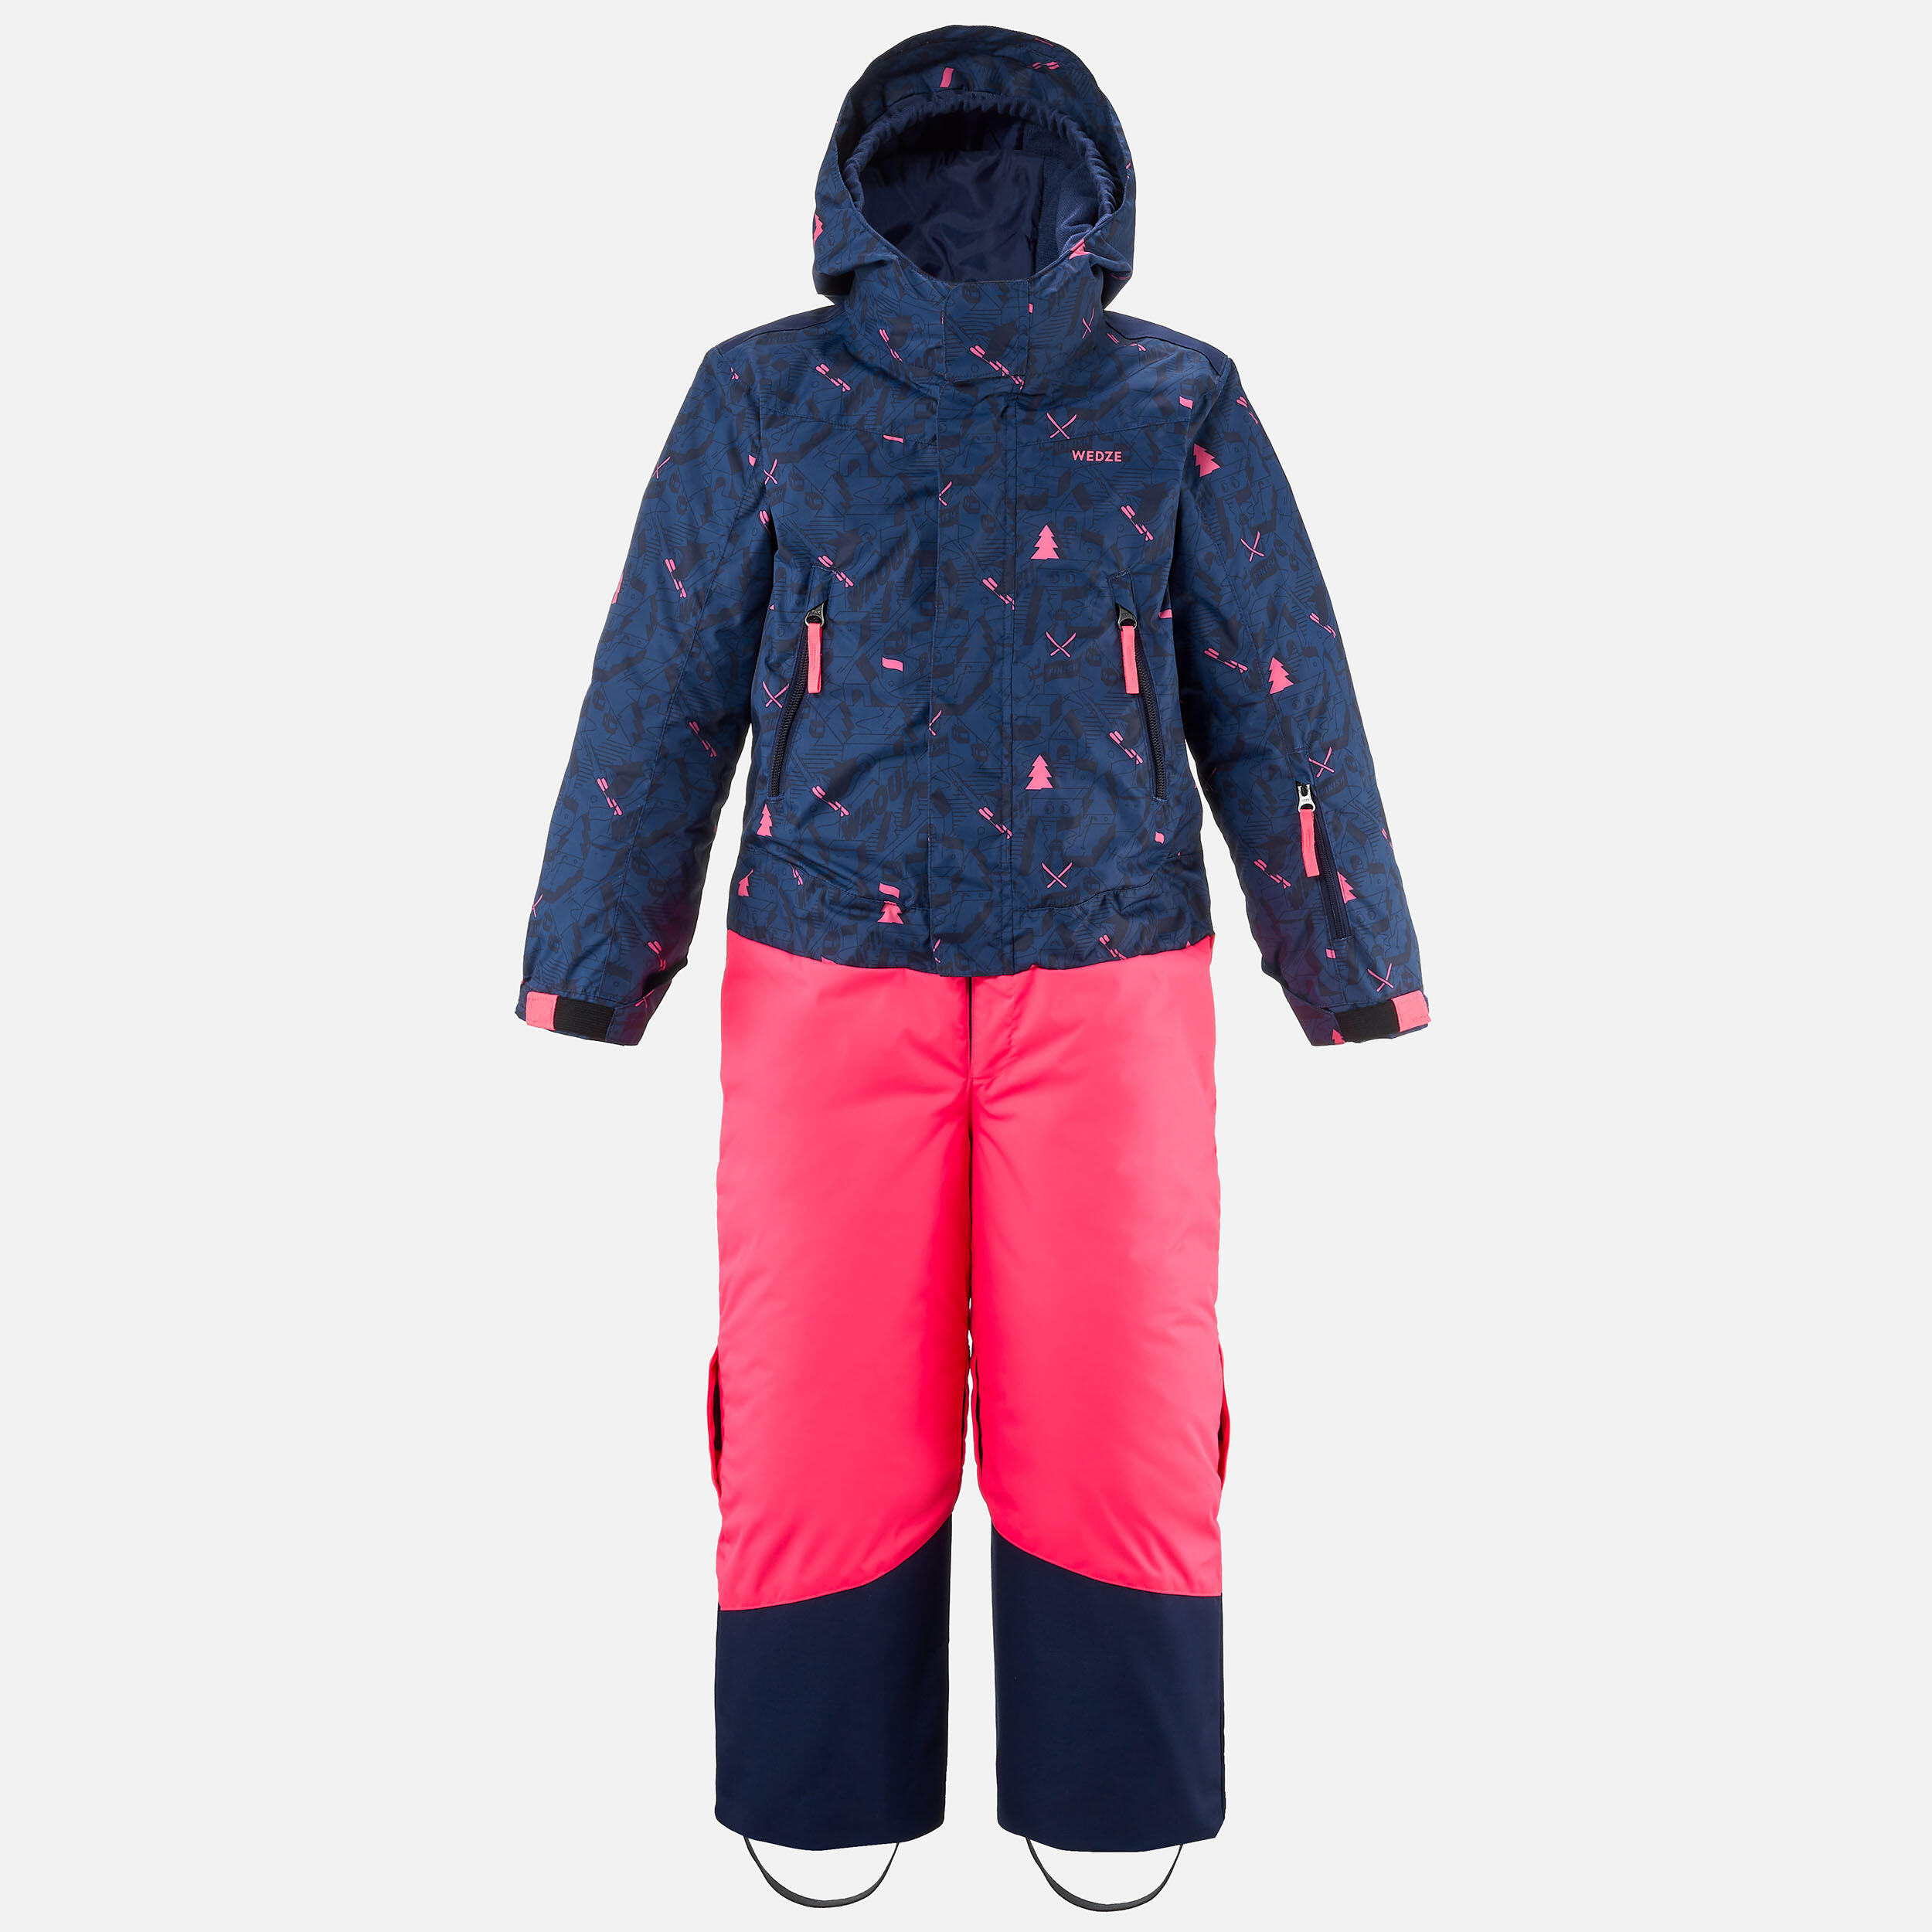 Kids’ Warm and Waterproof Ski Suit PNF 500 - Pink and Blue 2/6